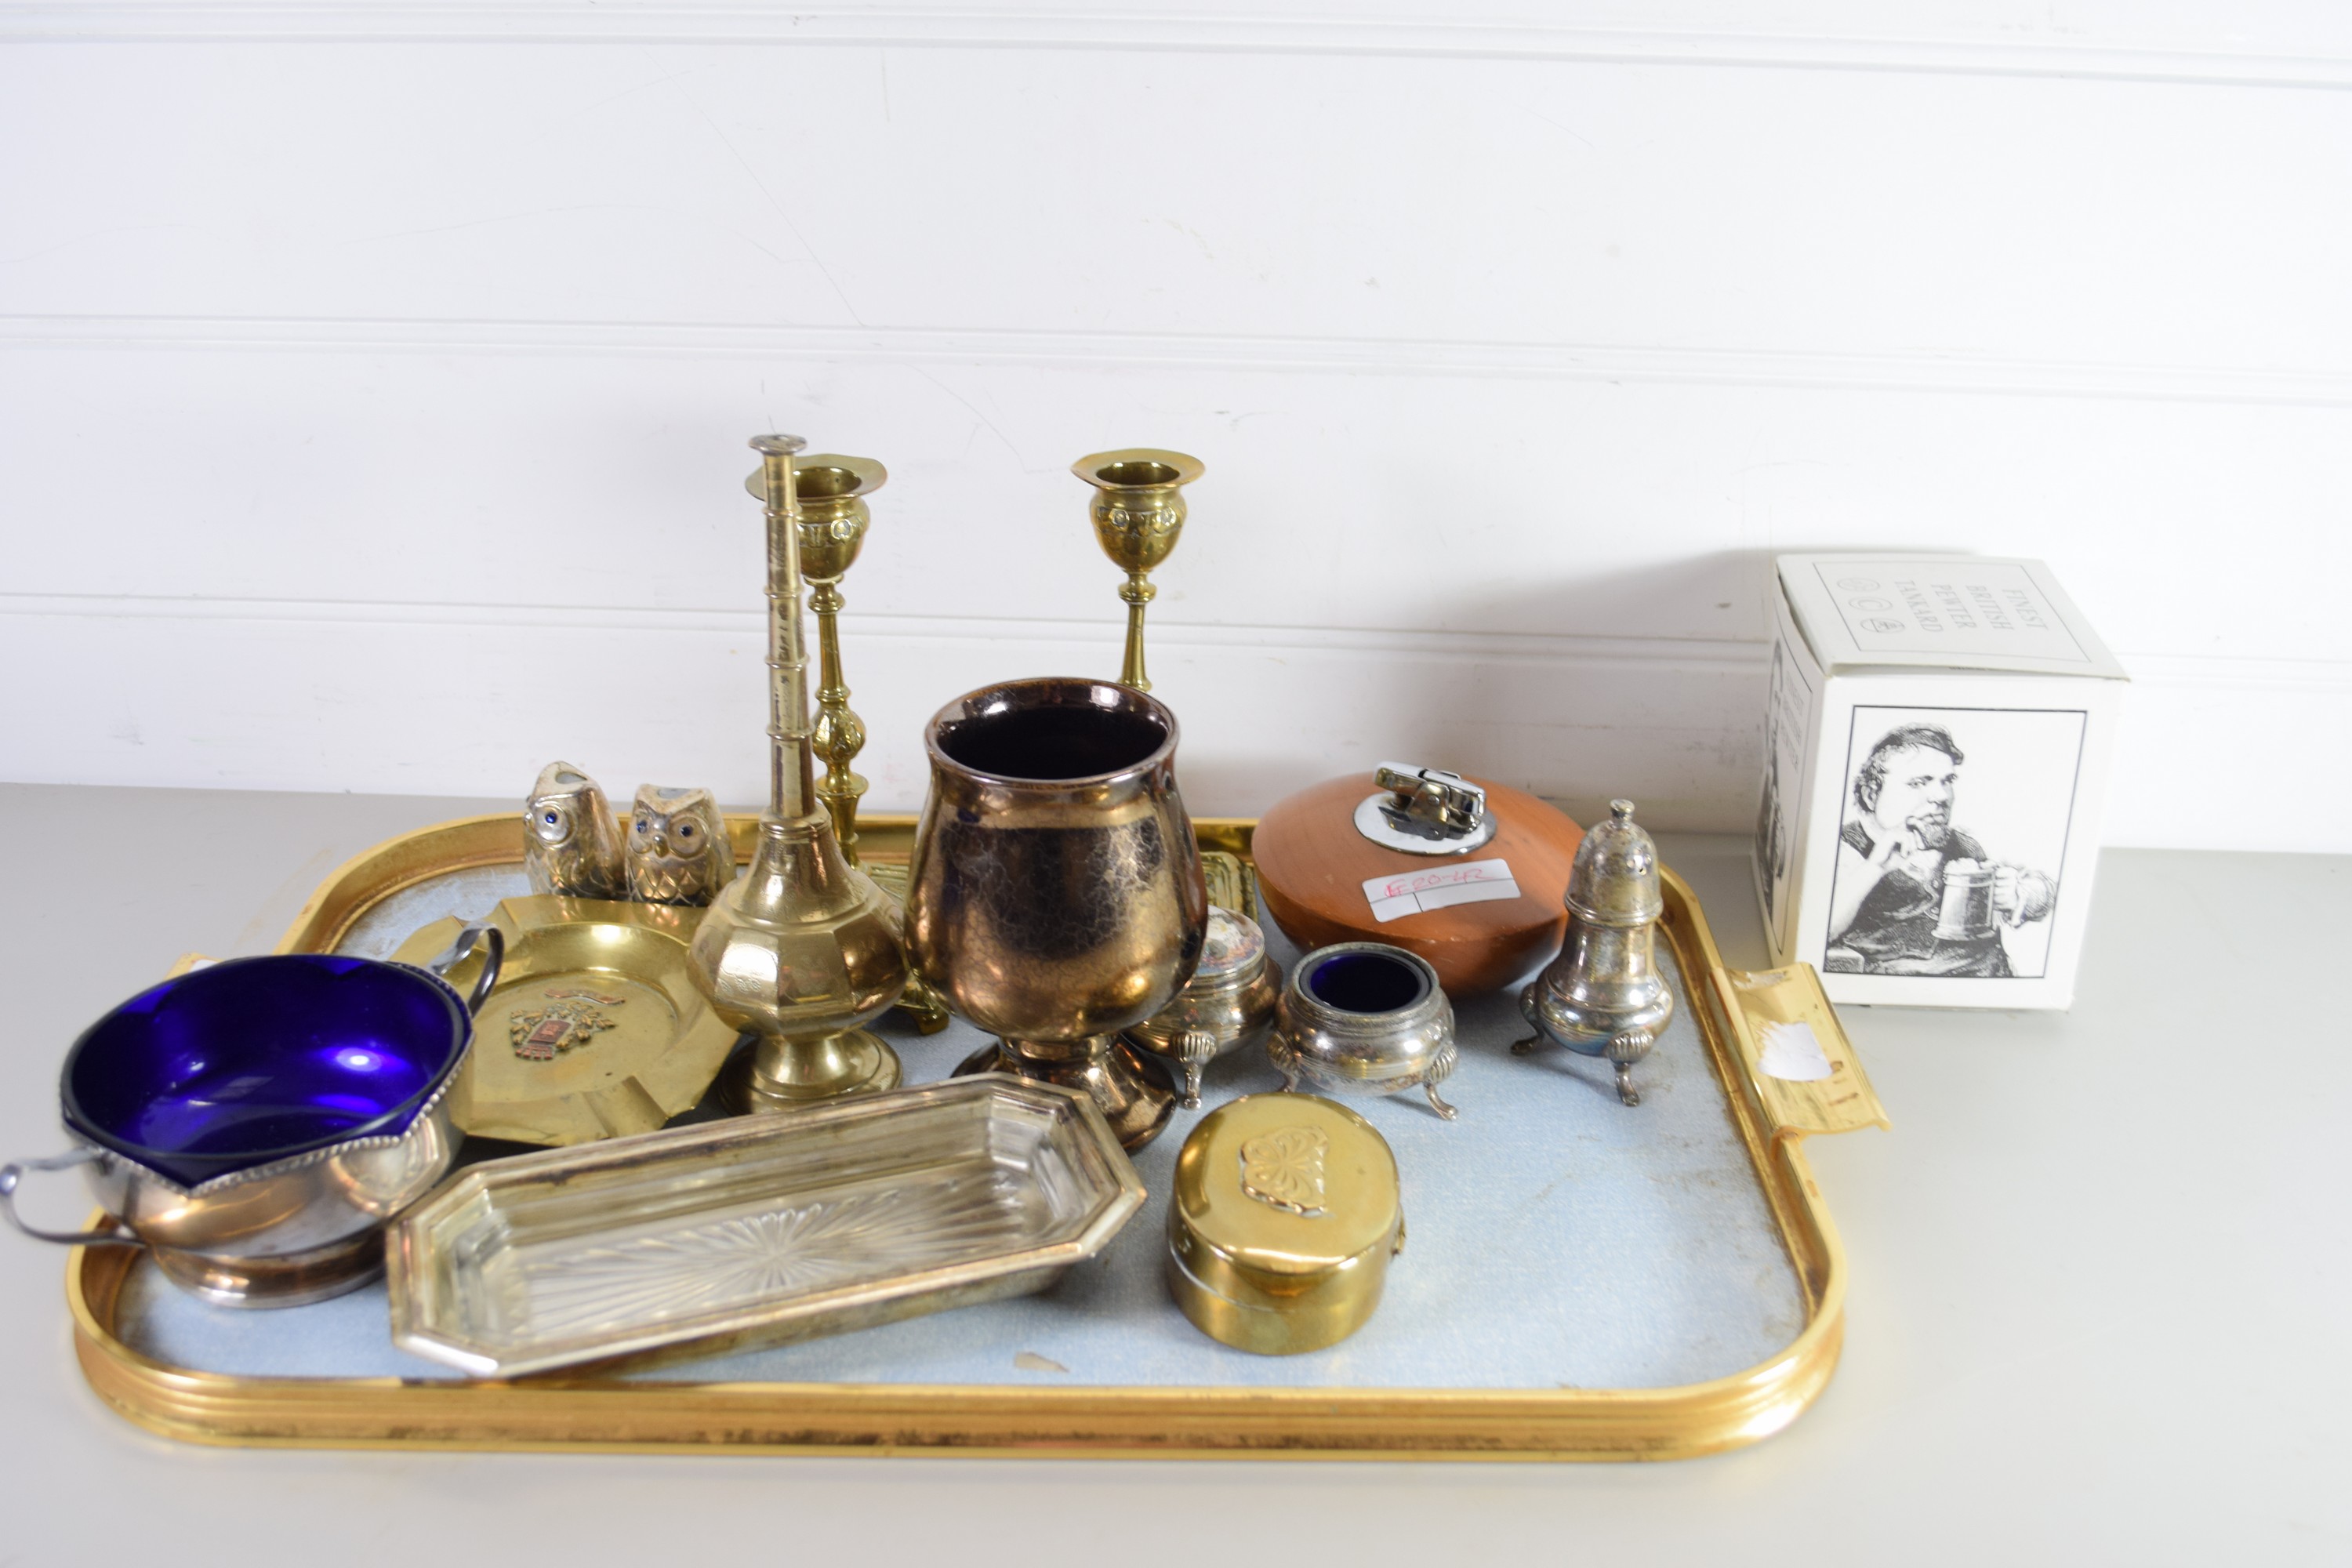 TRAY CONTAINING PAIR OF BRASS CANDLESTICKS, BRASS ASHTRAY WITH REGIMENTAL INSIGNIA ETC